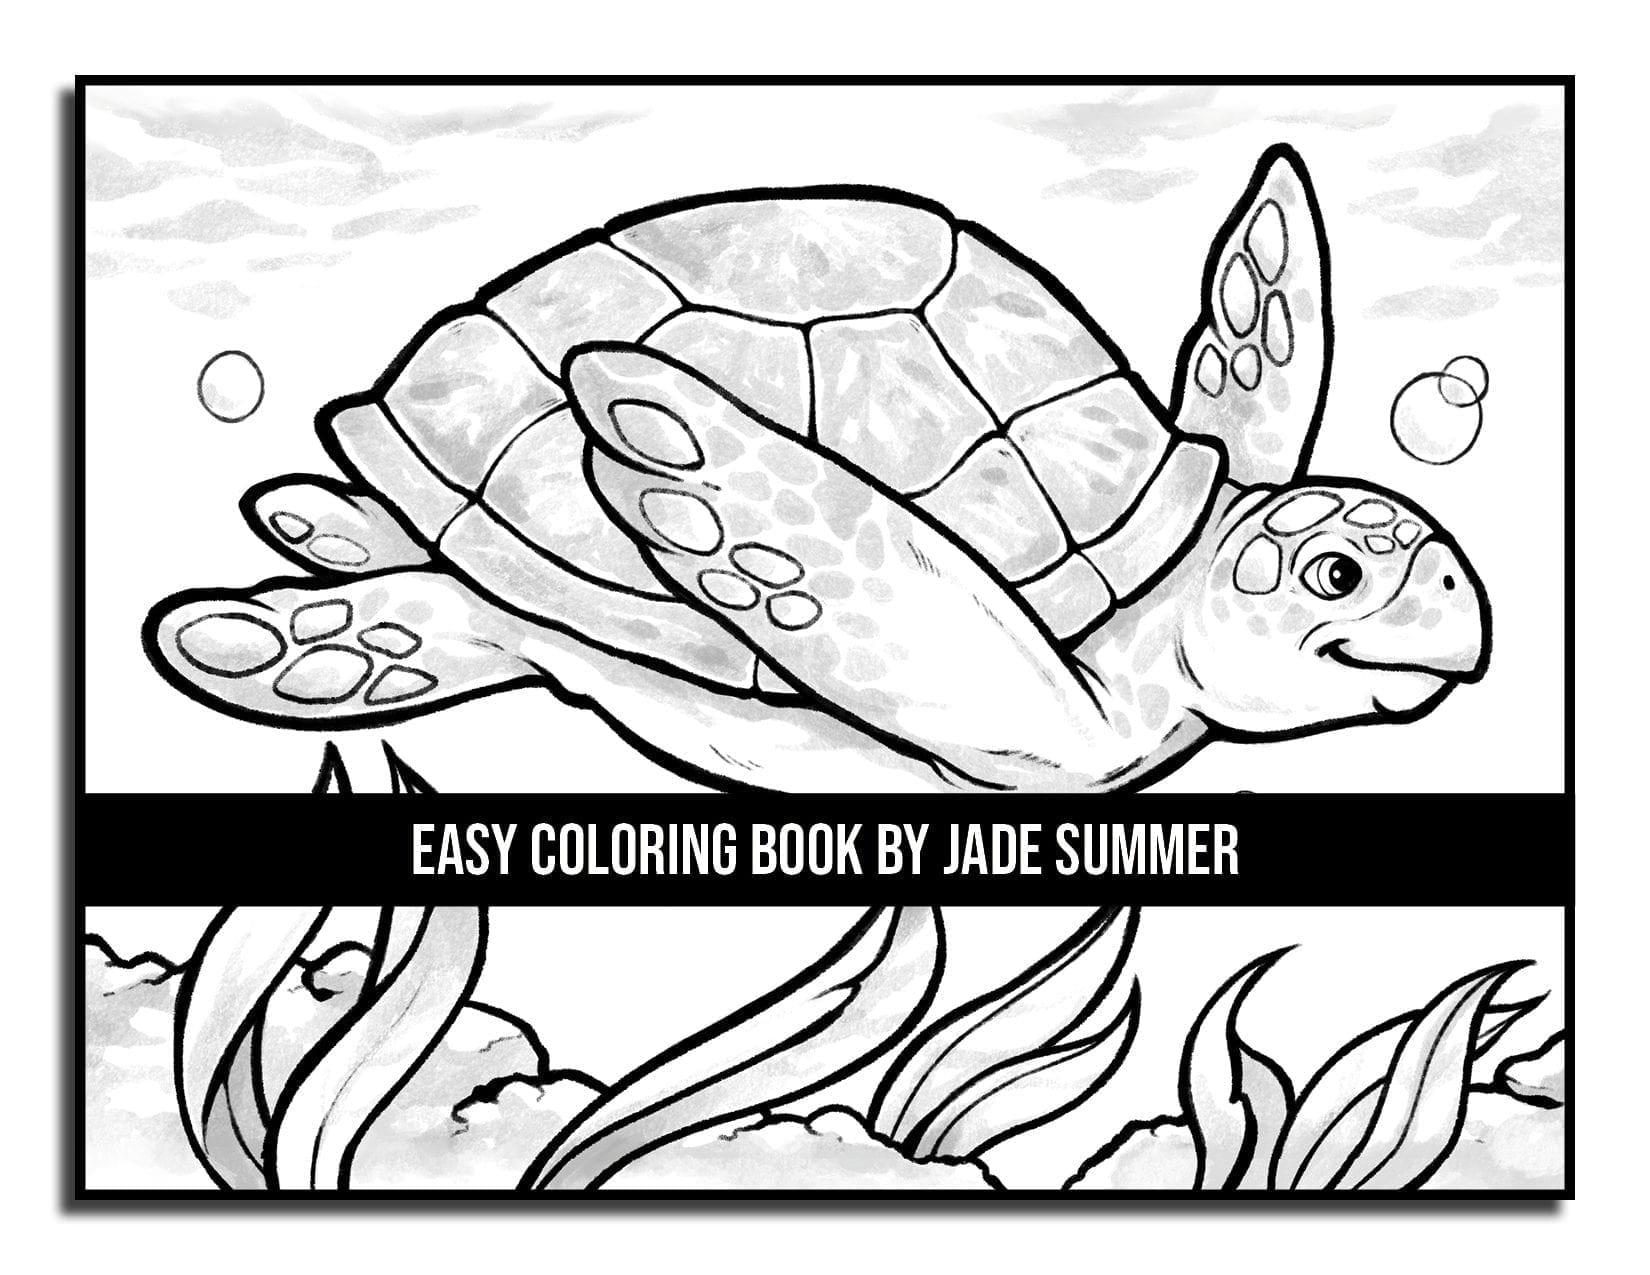 Learn & Color Books – A Colorful Way to Learn